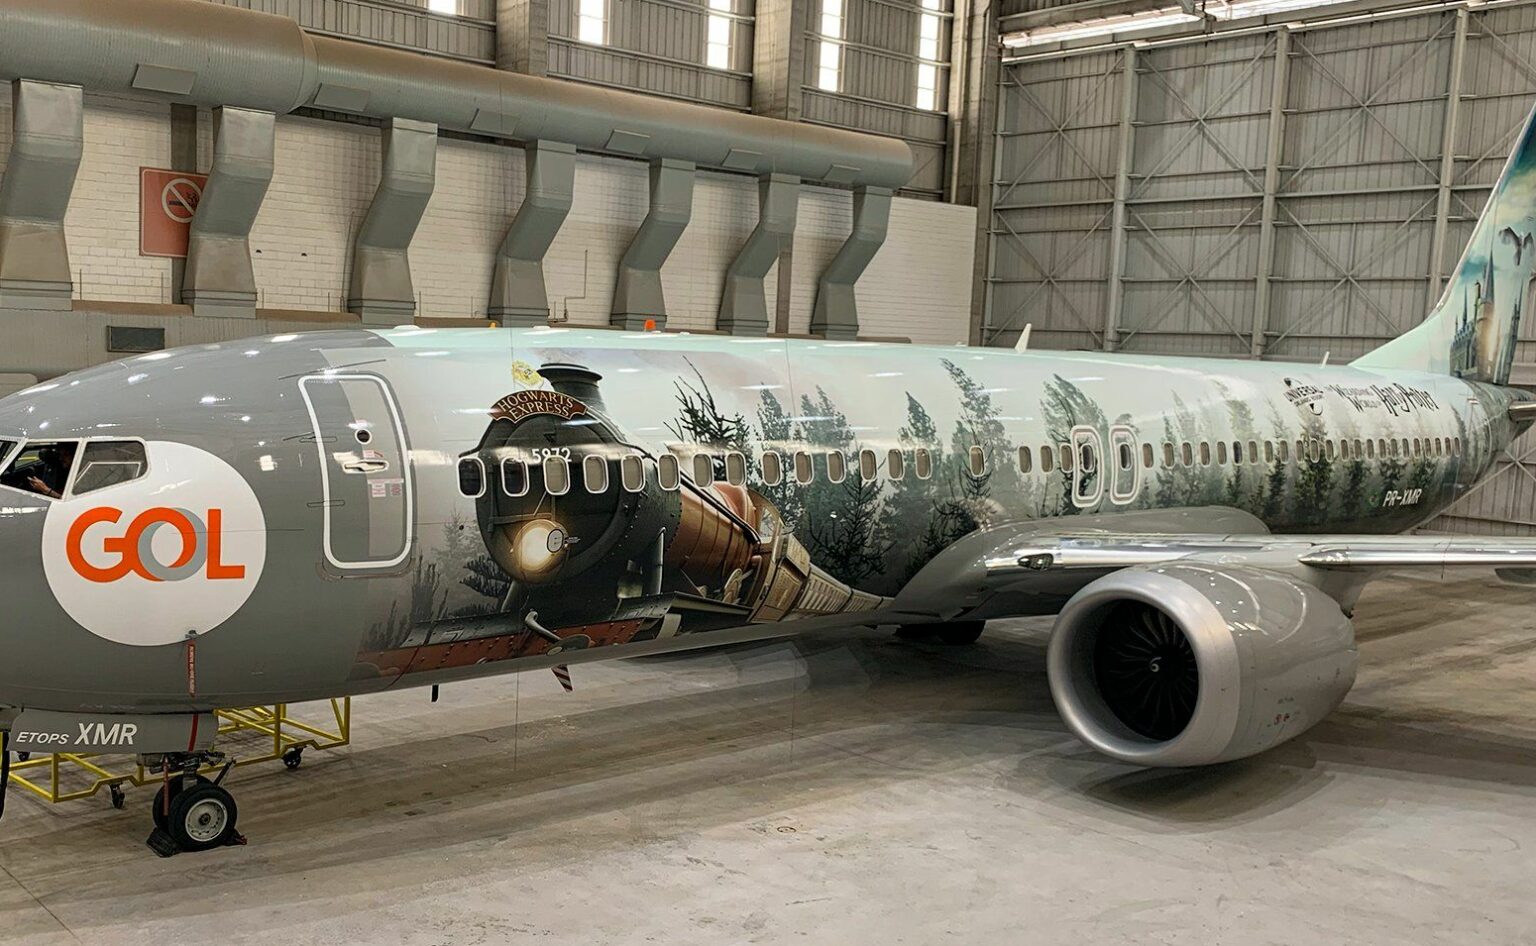 harry potter themed plane gol airlines